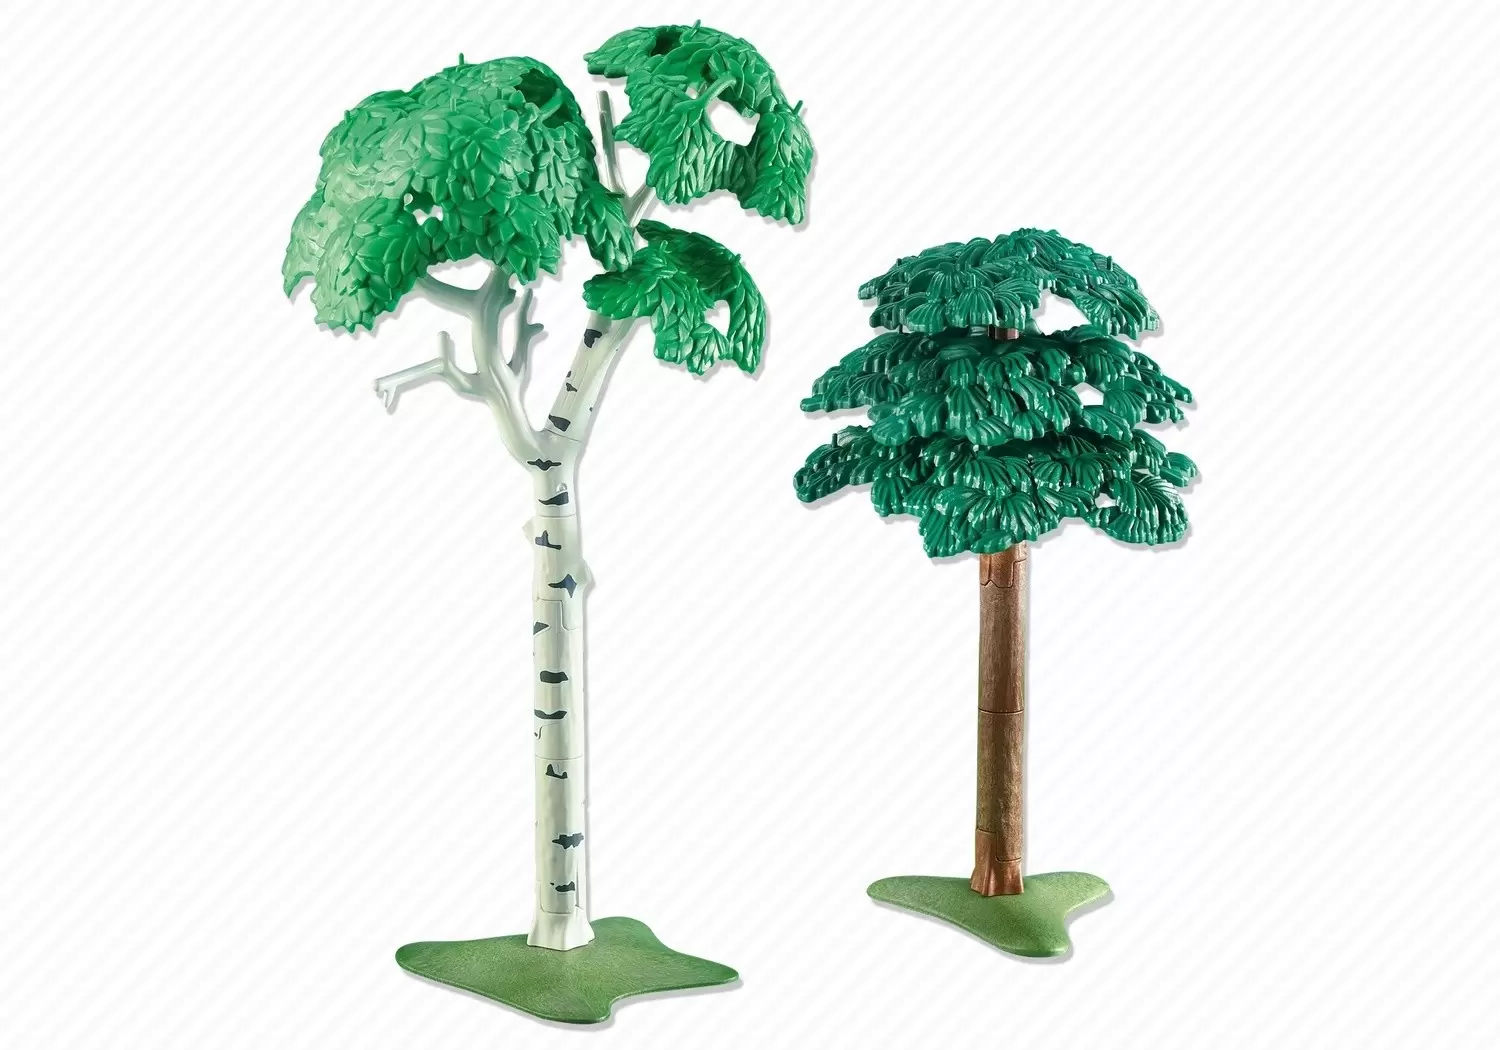 Playmobil Accessories & decorations - 2 trees